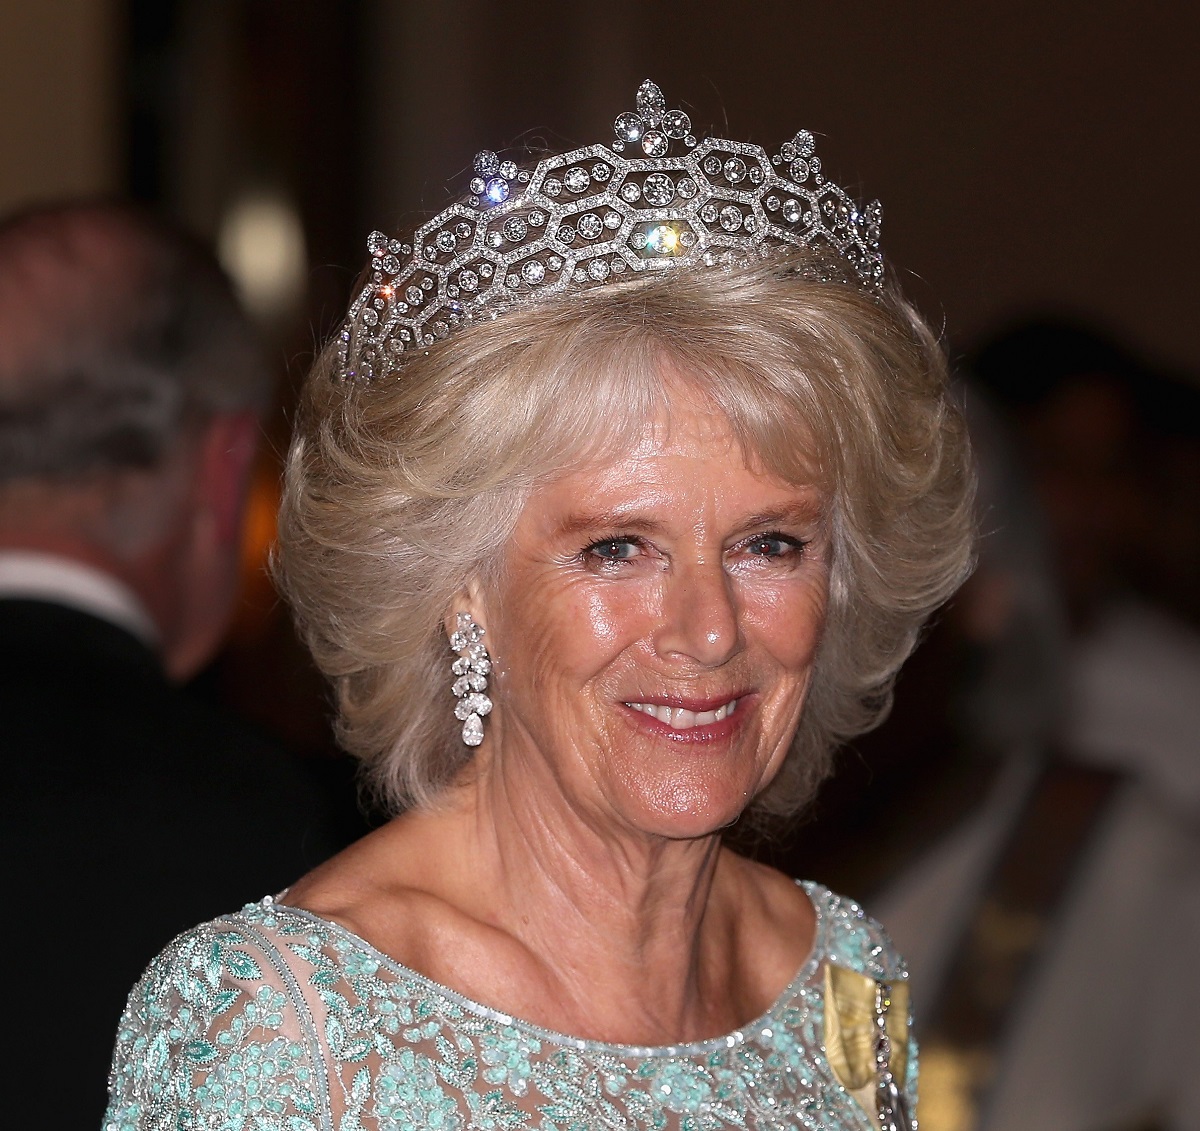 Camilla Parker Bowles attends a dinner reception during the Commonwealth Heads of Government Opening Ceremony